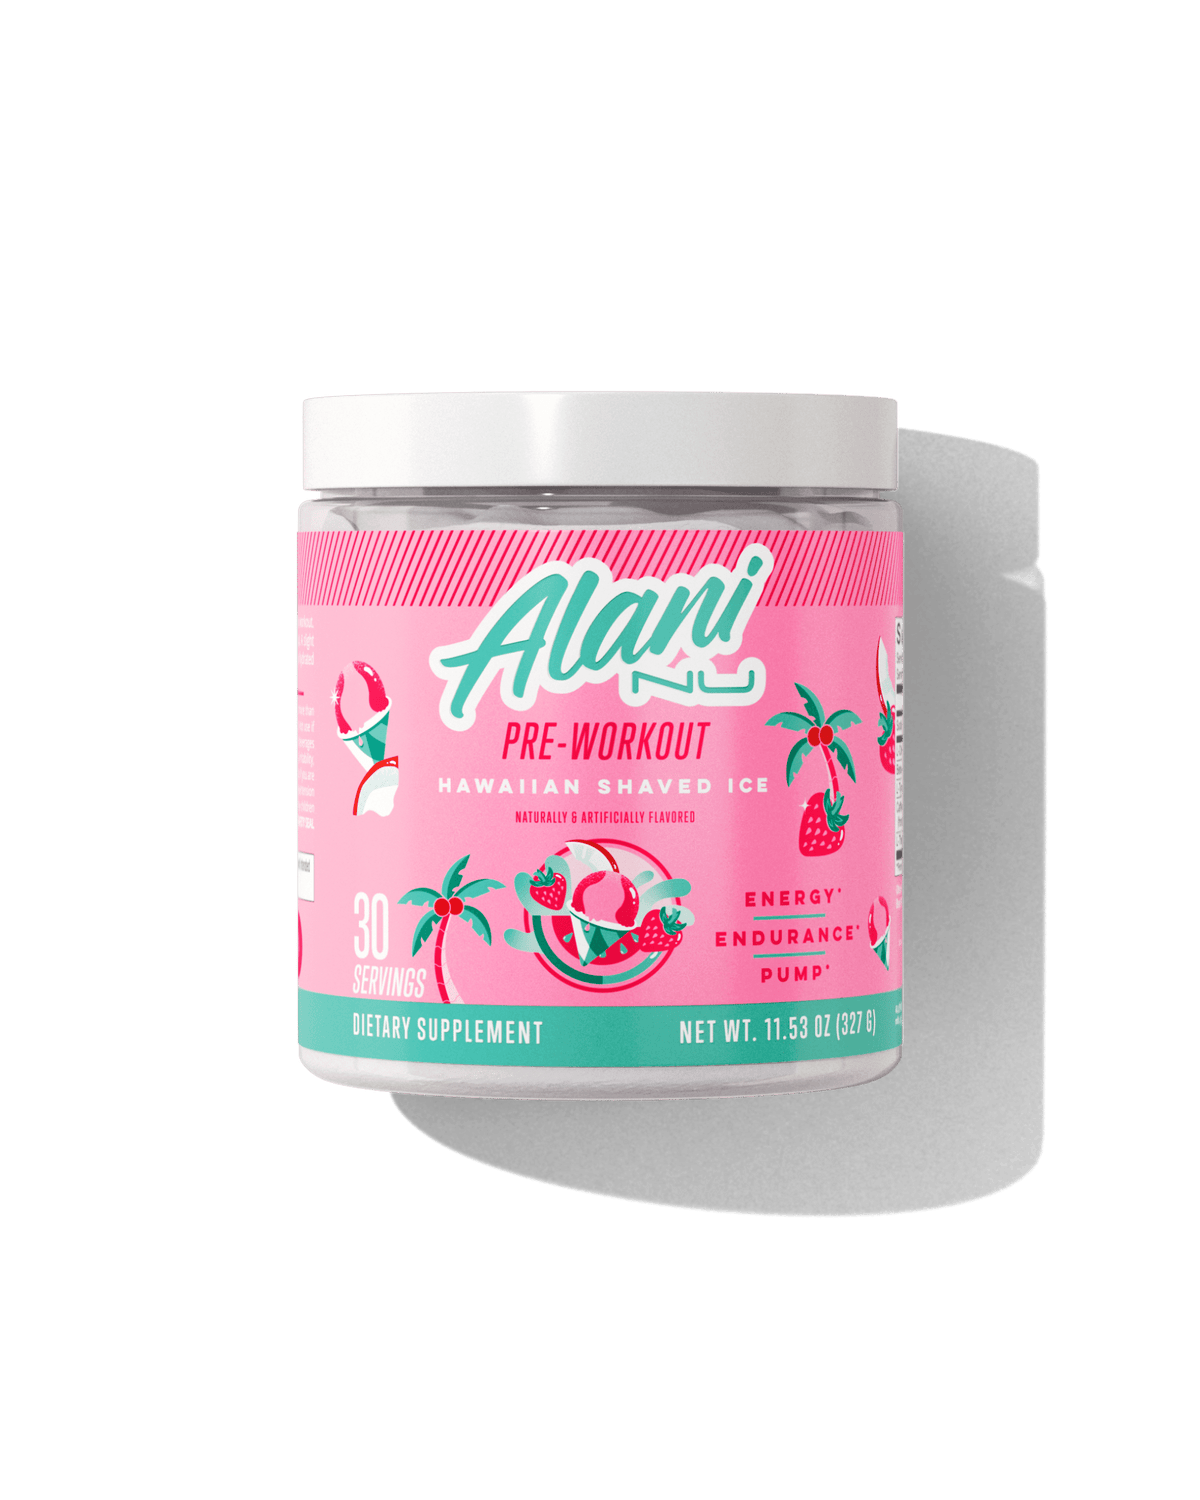 A 30 serving container of Pre-workout in Hawaiian Shaved Ice flavor.